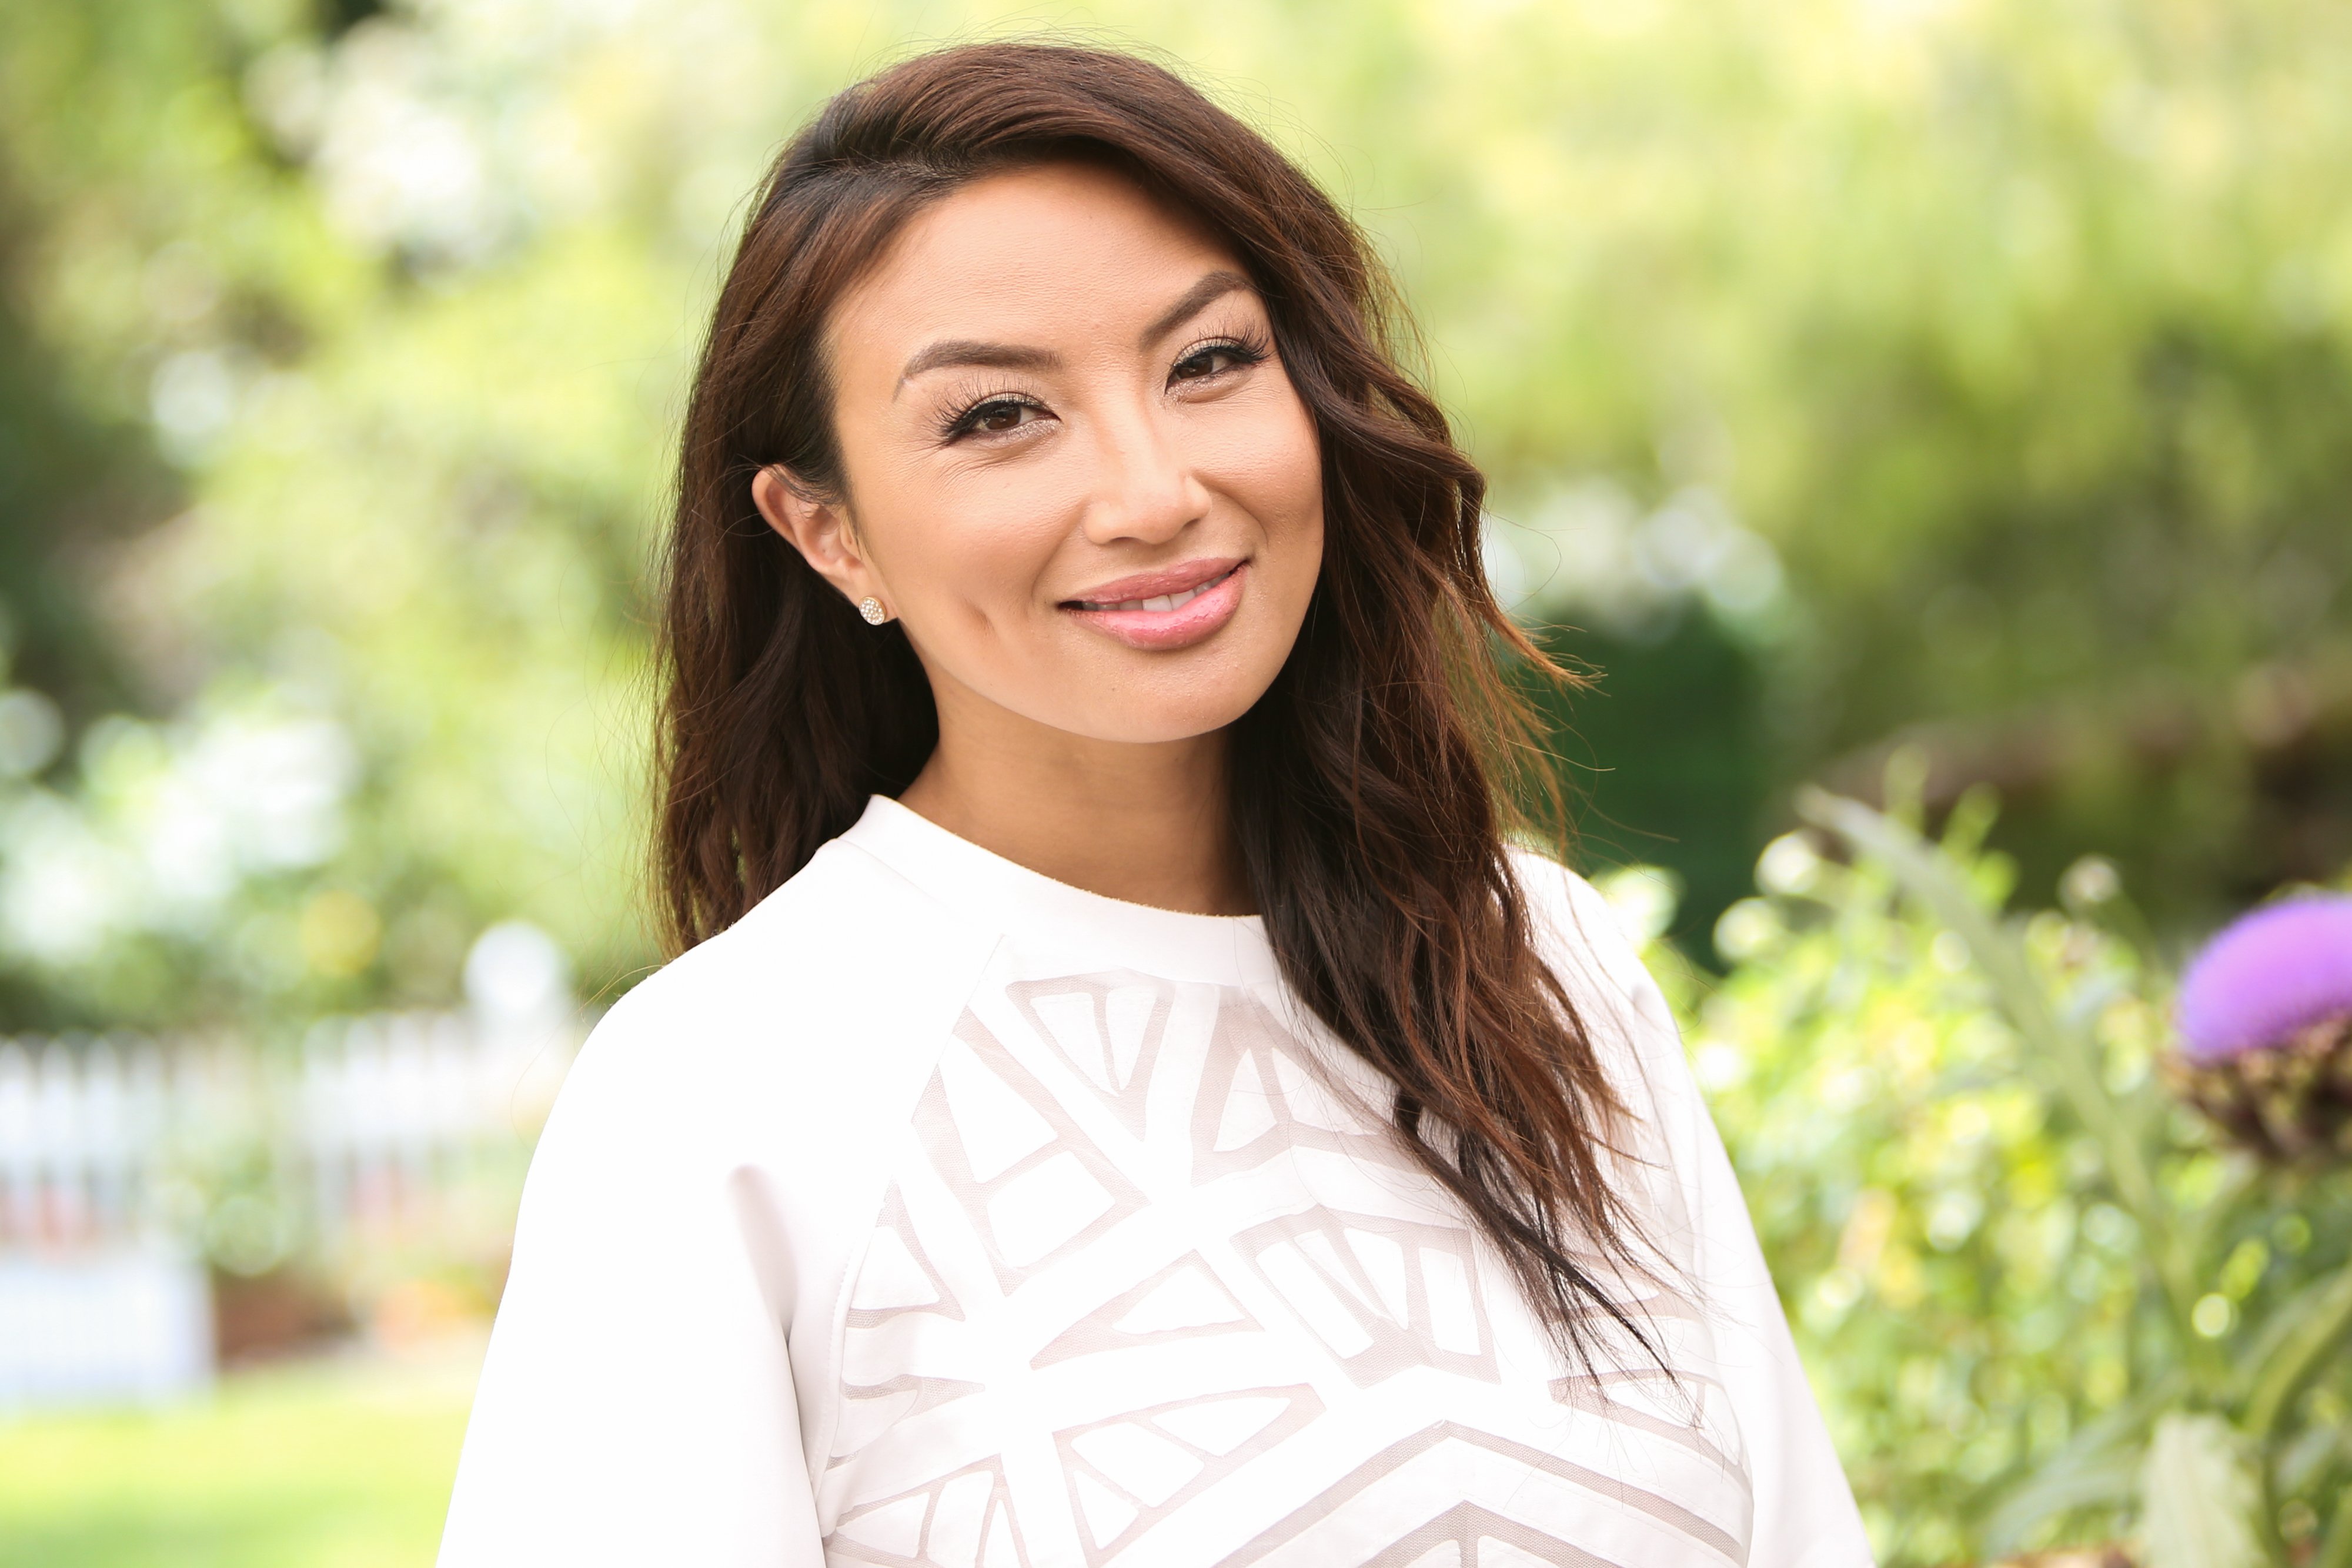  Jeannie Mai visits Hallmark's "Home & Family" at Universal Studios Hollywood on June 11, 2019 in Universal City, California. | Source: Getty Images